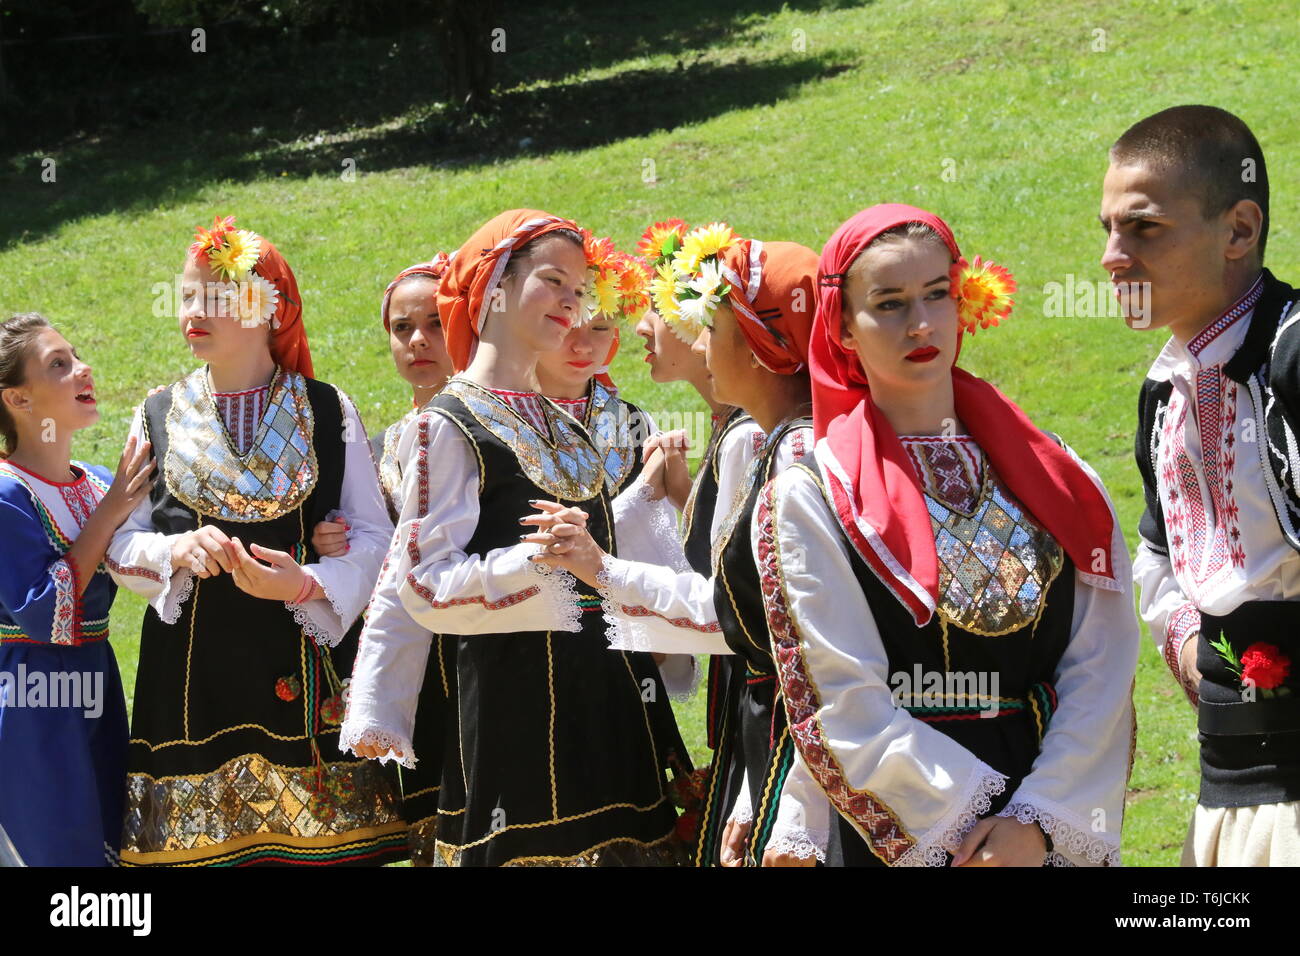 People in traditional authentic folk costumes Stock Photo - Alamy